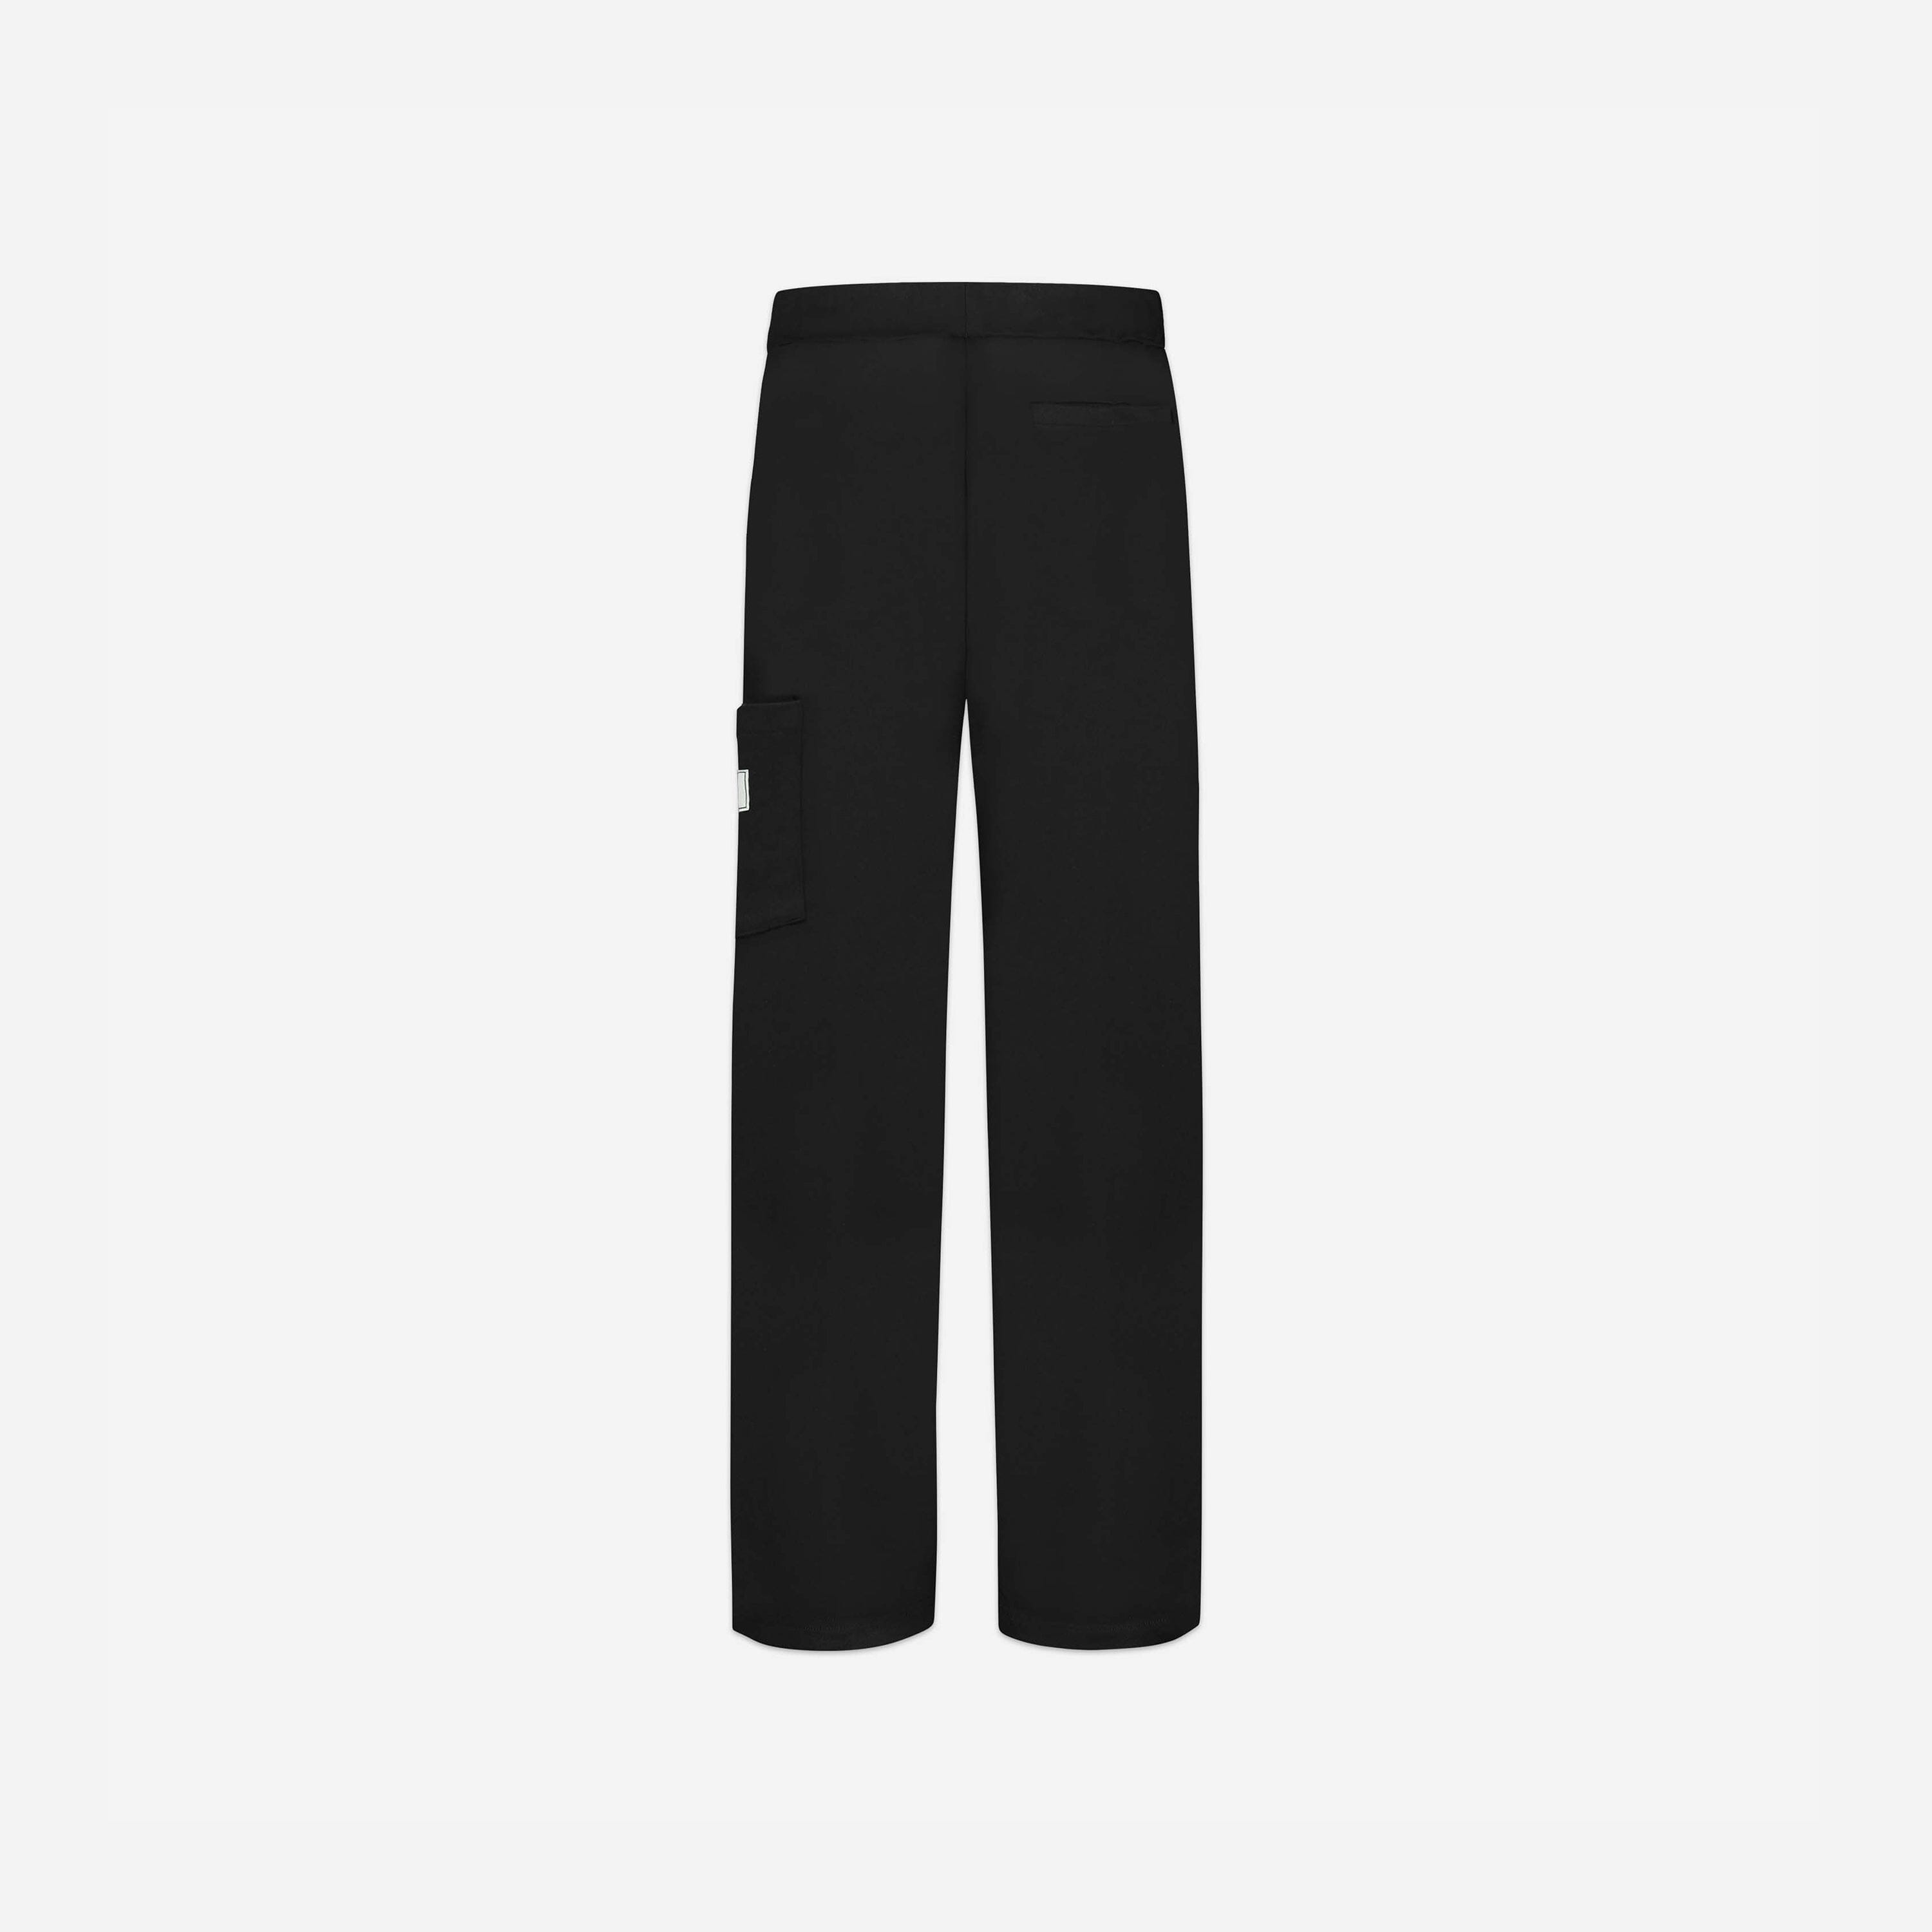 Buy FCUK by Shoppers Stop Screen Print Cotton Blend Terry Slim Fit Mens  Trousers Black Medium at Amazonin